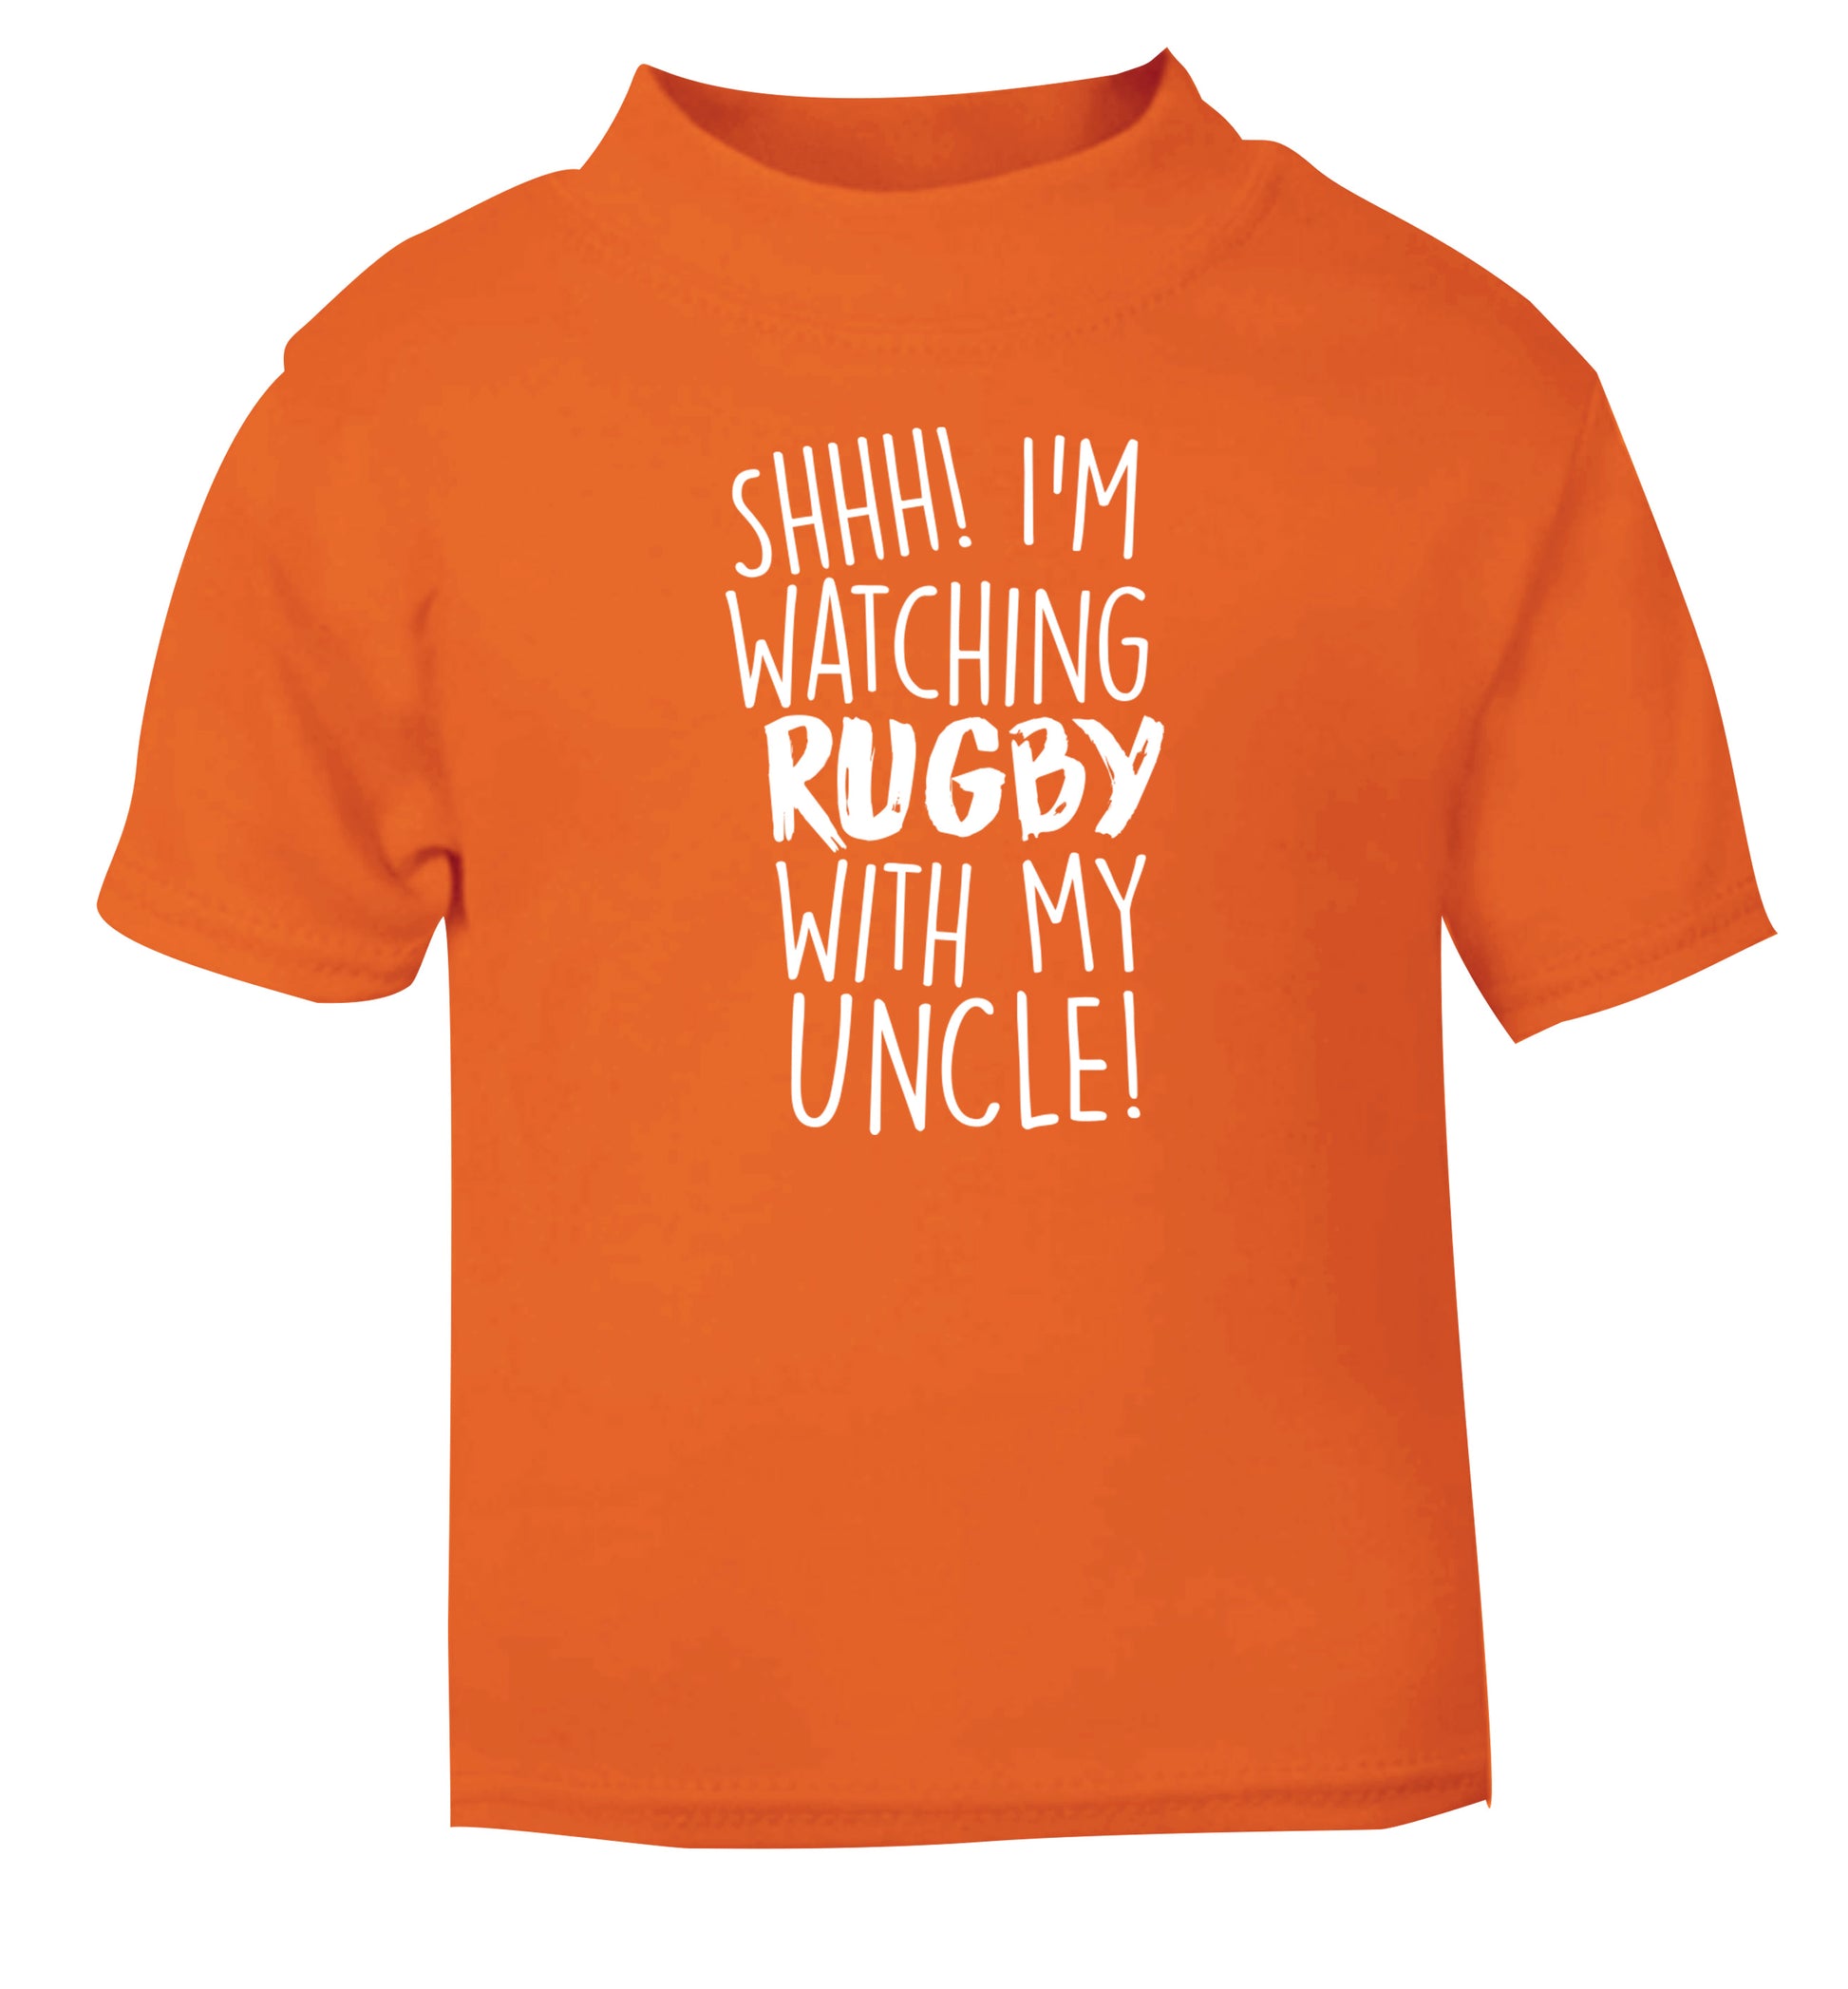 Shh.. I'm watching rugby with my uncle orange Baby Toddler Tshirt 2 Years